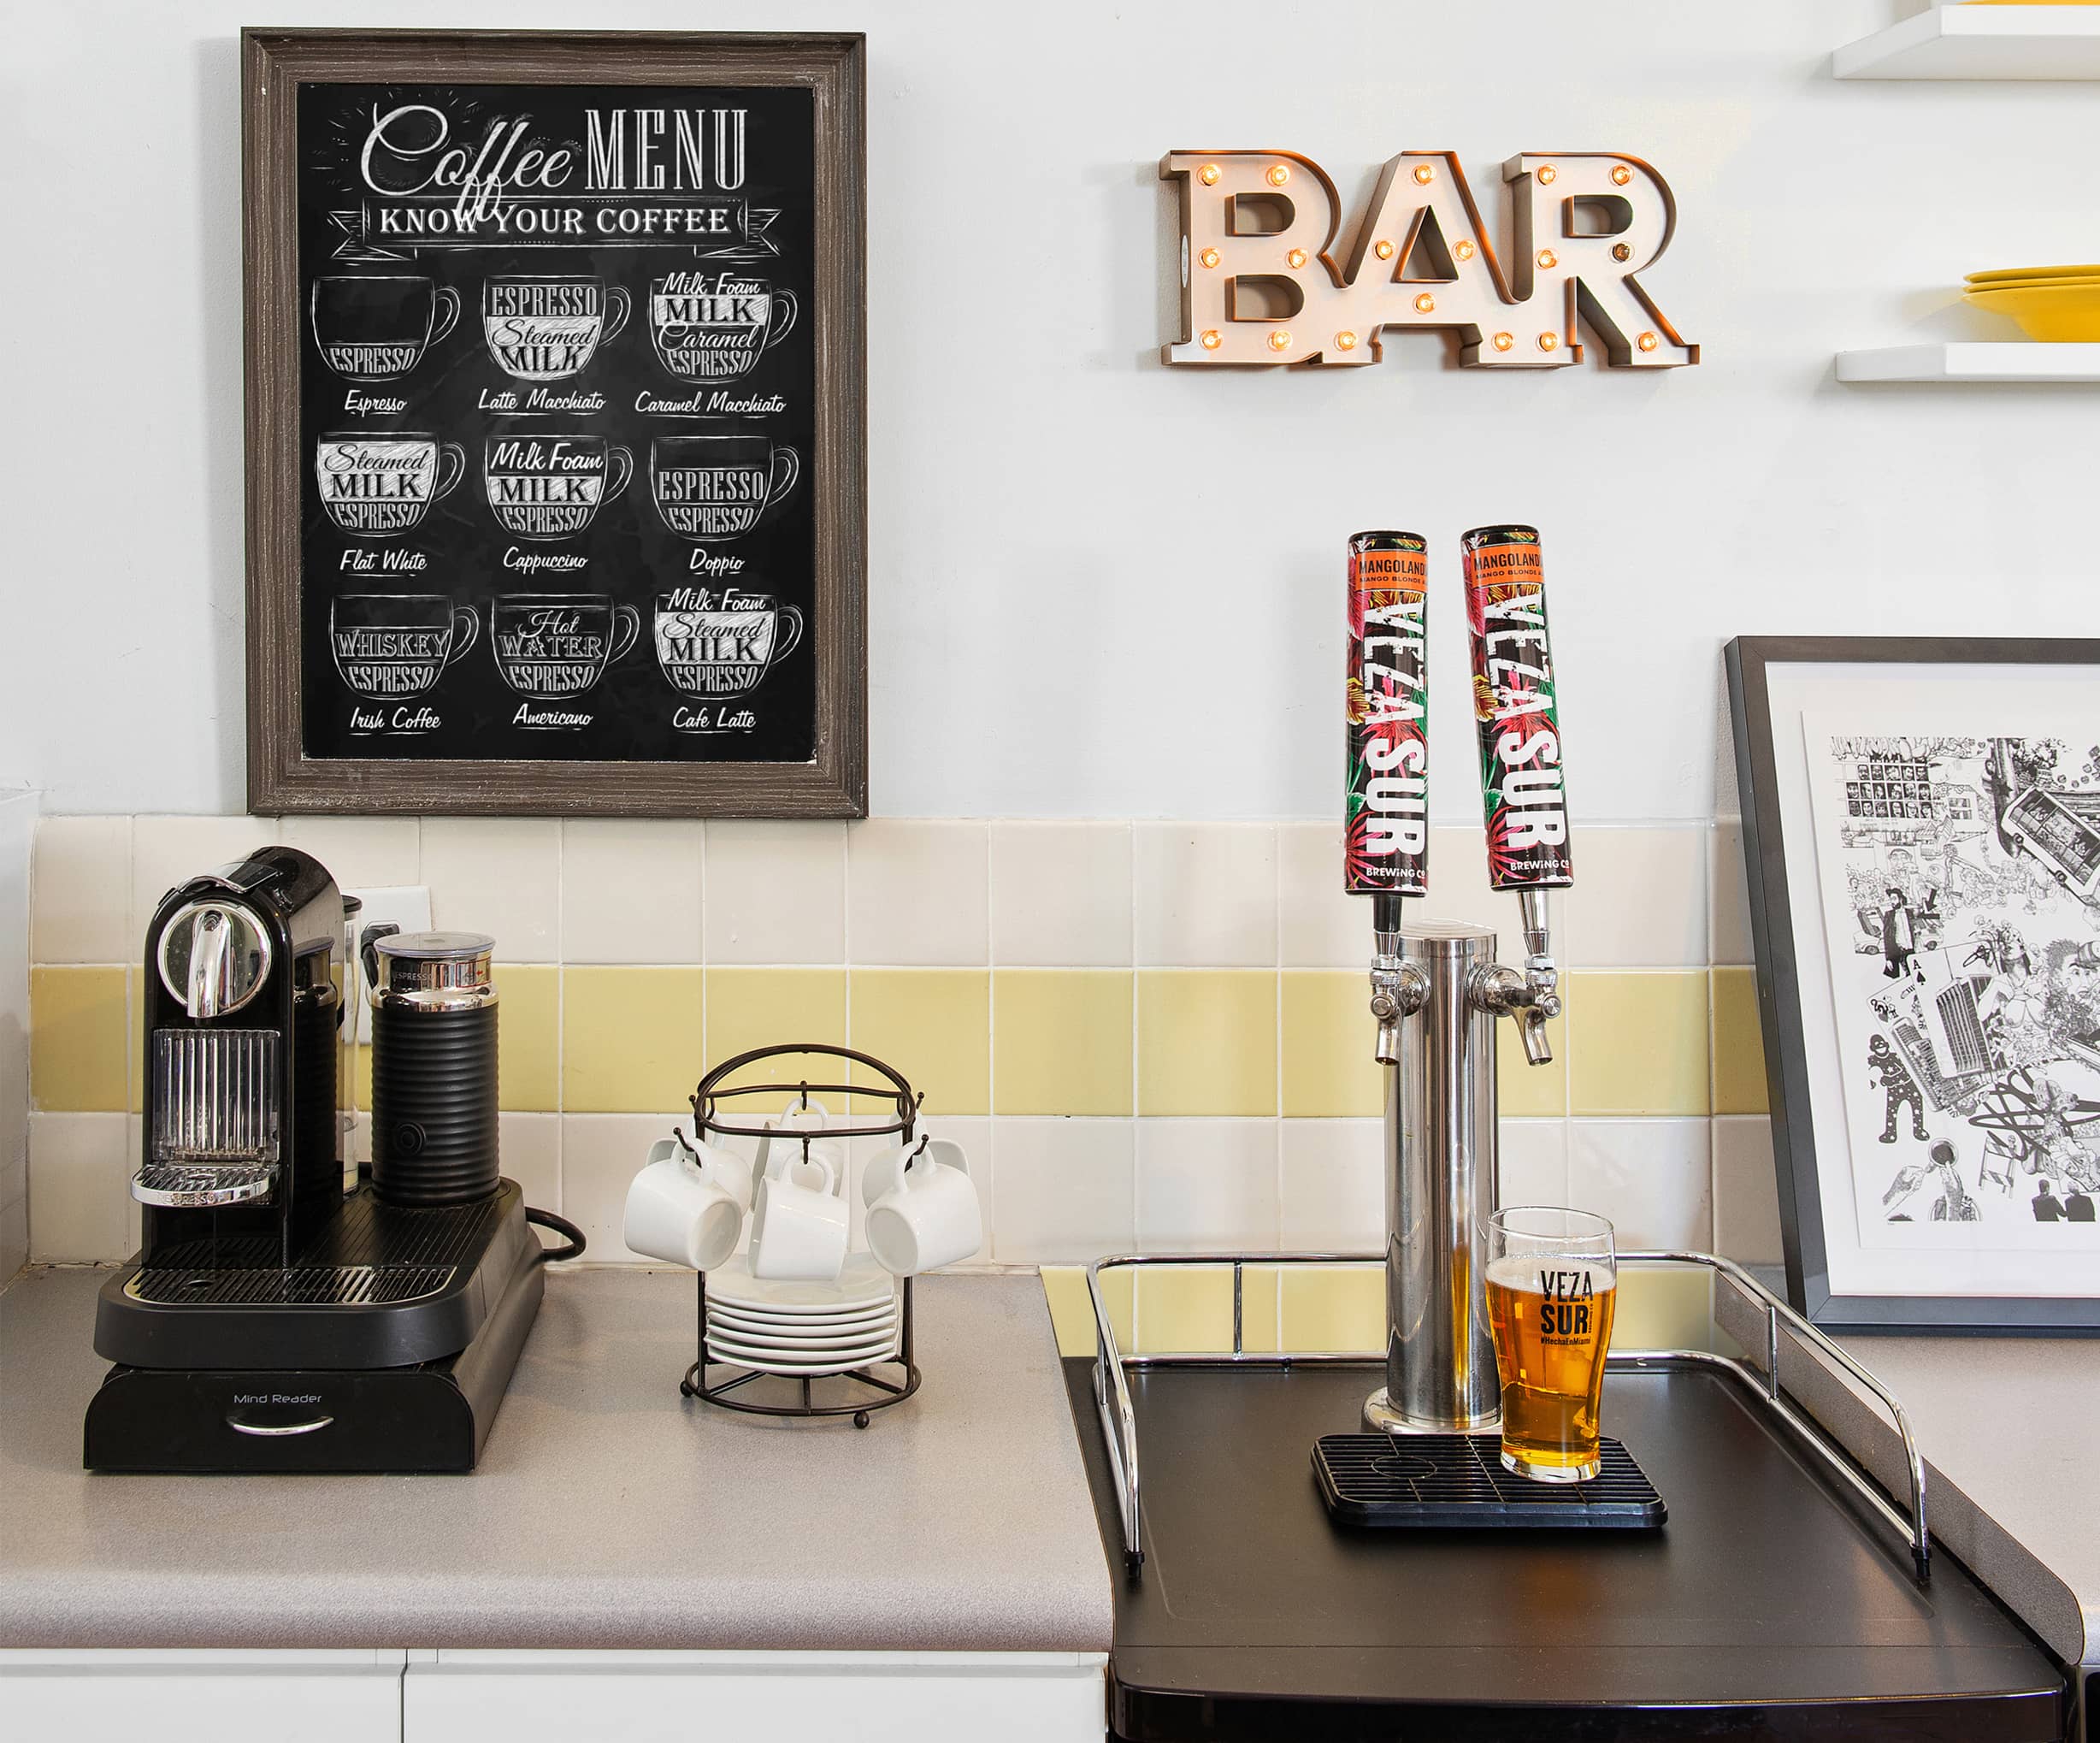 Kitchen countertop with coffee machine, beer tap and other decorative elements